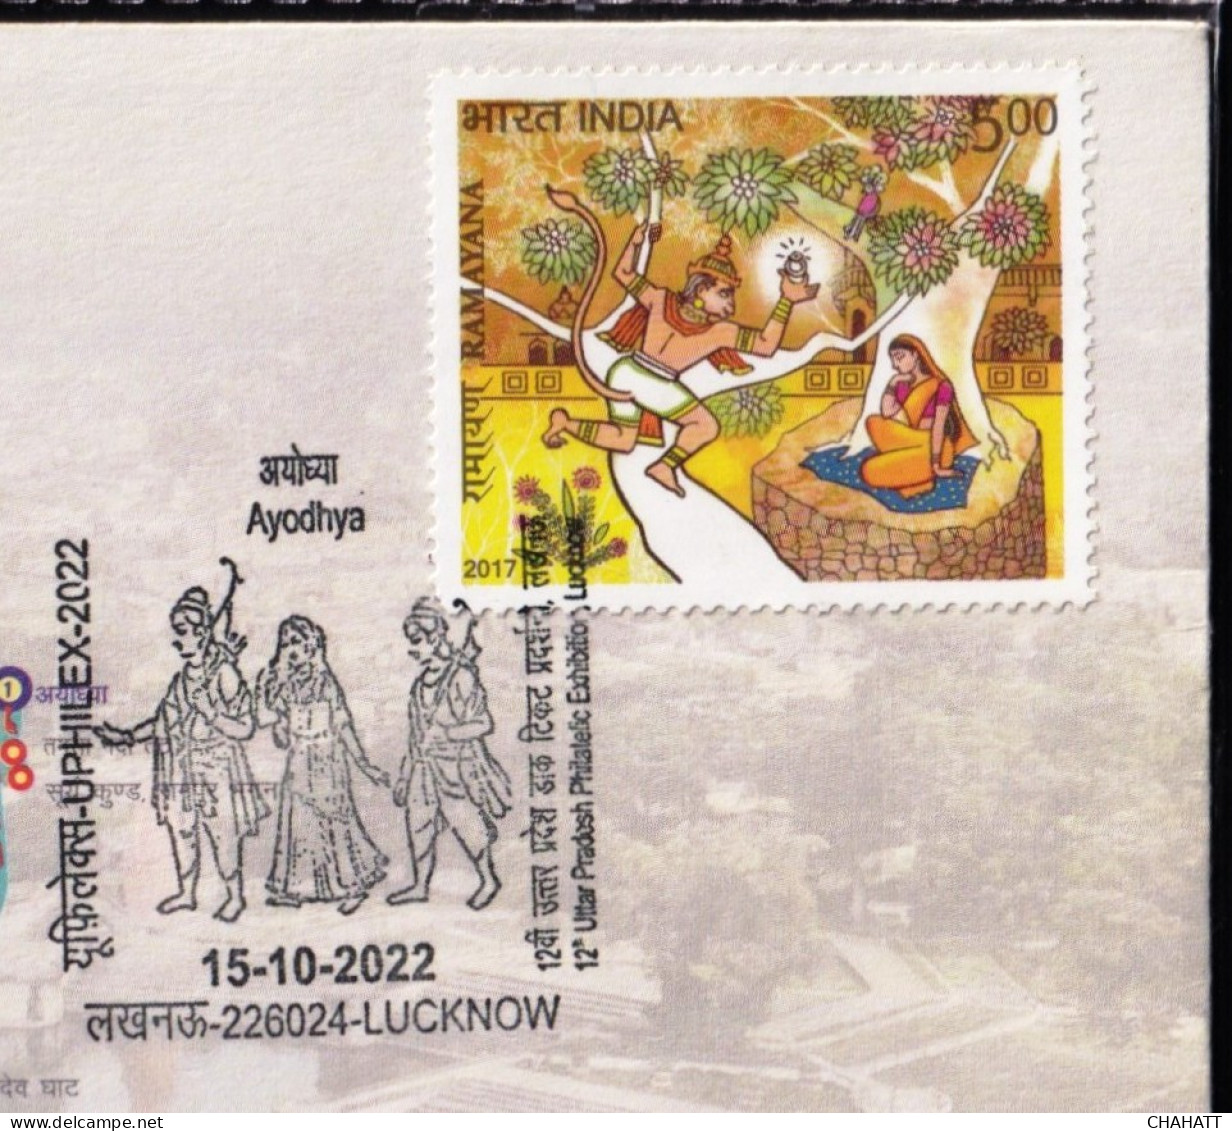 HINDUISM - RAMAYAN-  ARCHERY, AYODHYA - PICTORIAL CANCELLATION - SPECIAL COVER - INDIA -2022- BX4-23 - Hinduismus